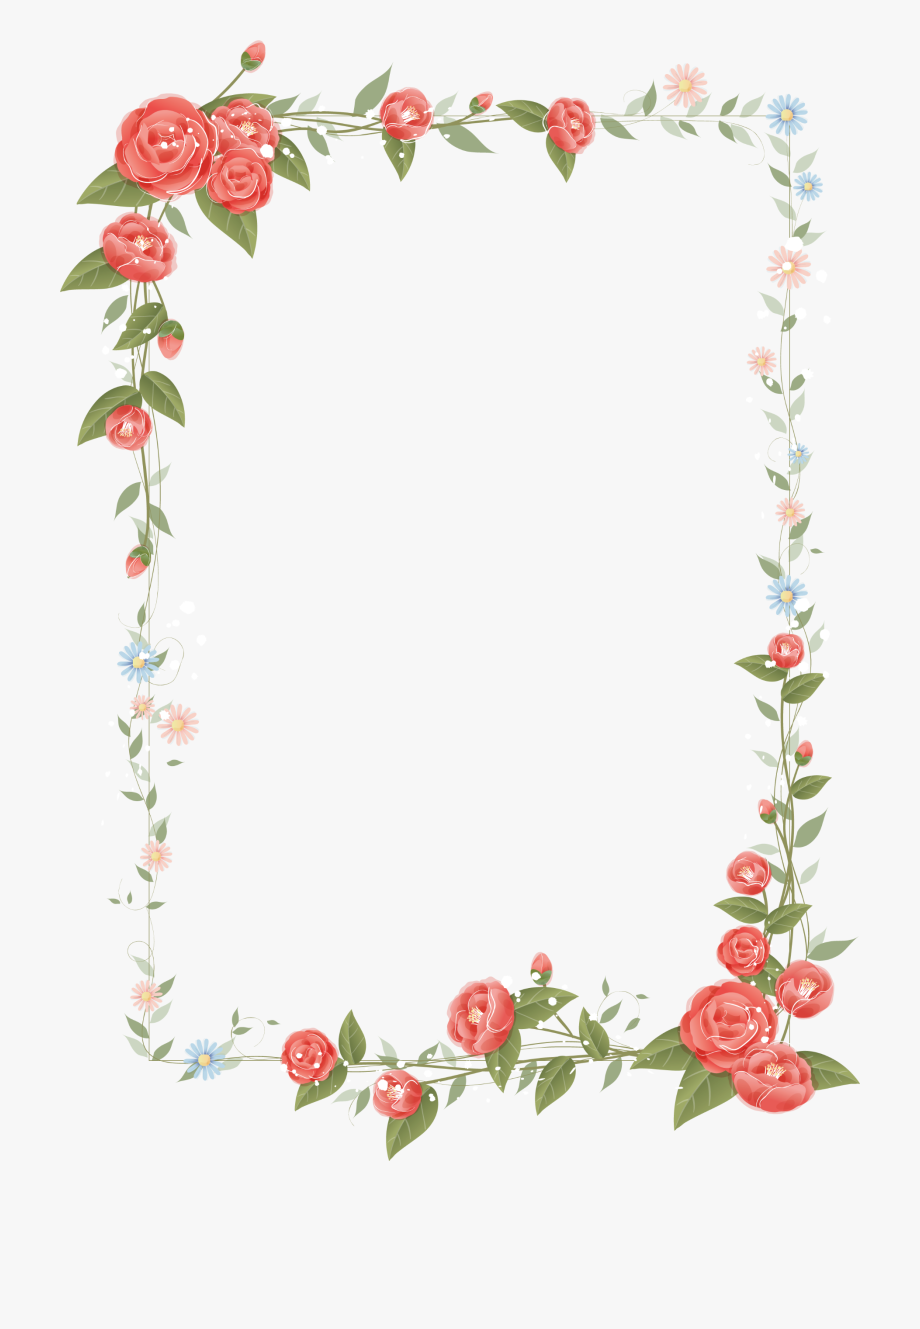 Temporary Simple Flower Border Clipart Image Flowers Borders 